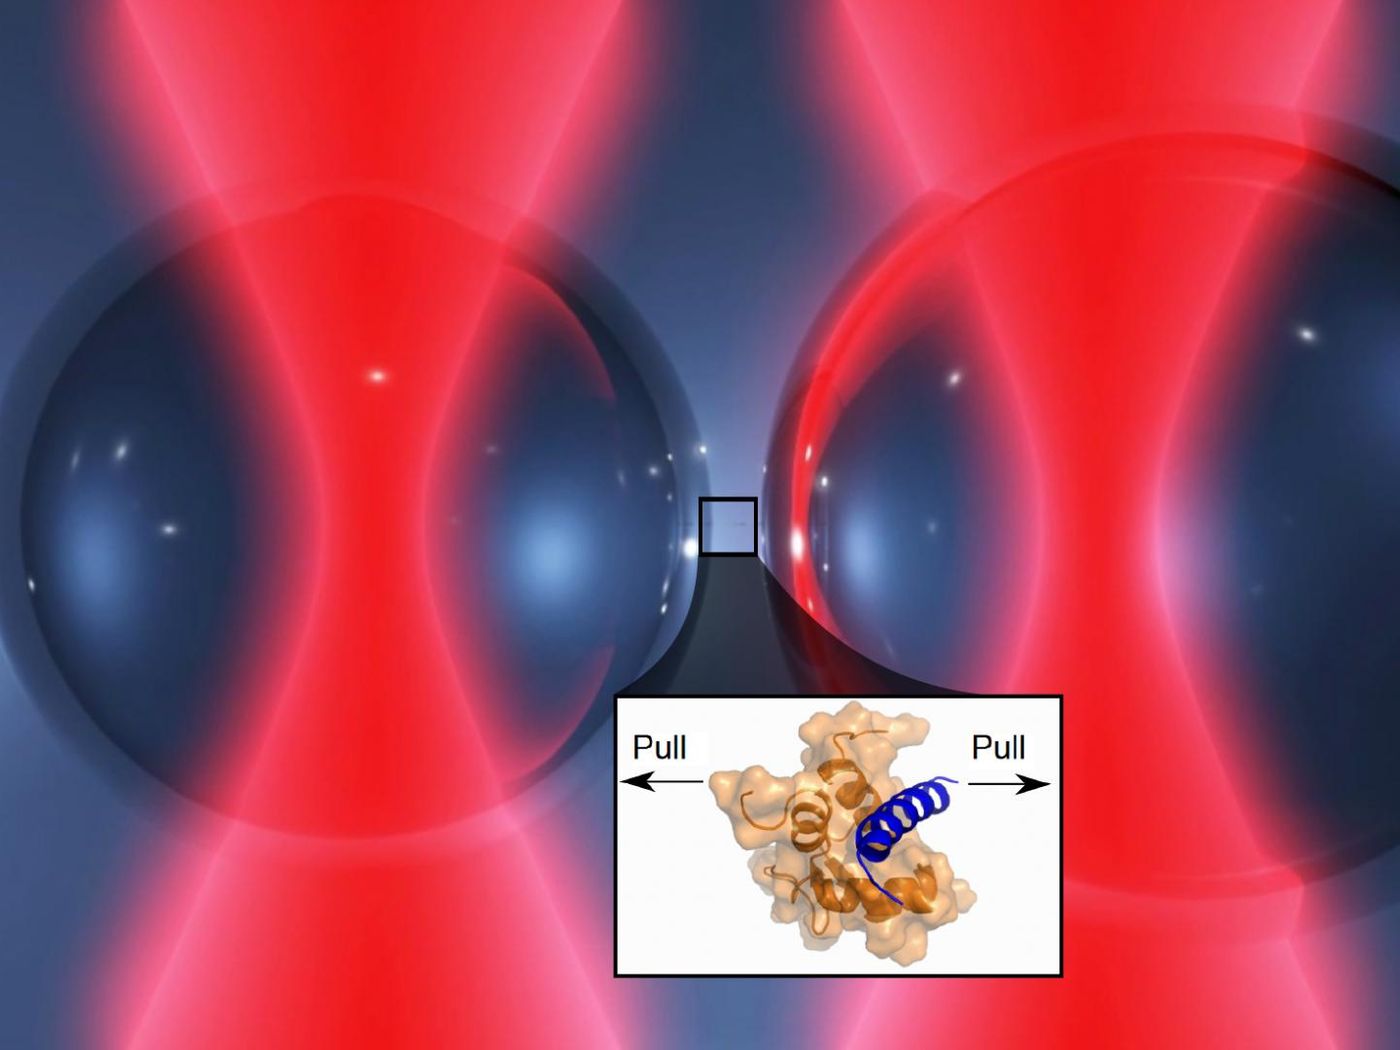 Two laser beams hold tiny glass beads in a position very close to each other. One end of the protein complex is fixed on the surface of the left brad, the other end on the right. If the laser moves the glass beads apart, the protein molecules are forced to stretch and the forces can be measured. Credit: Marco Grison / TUM